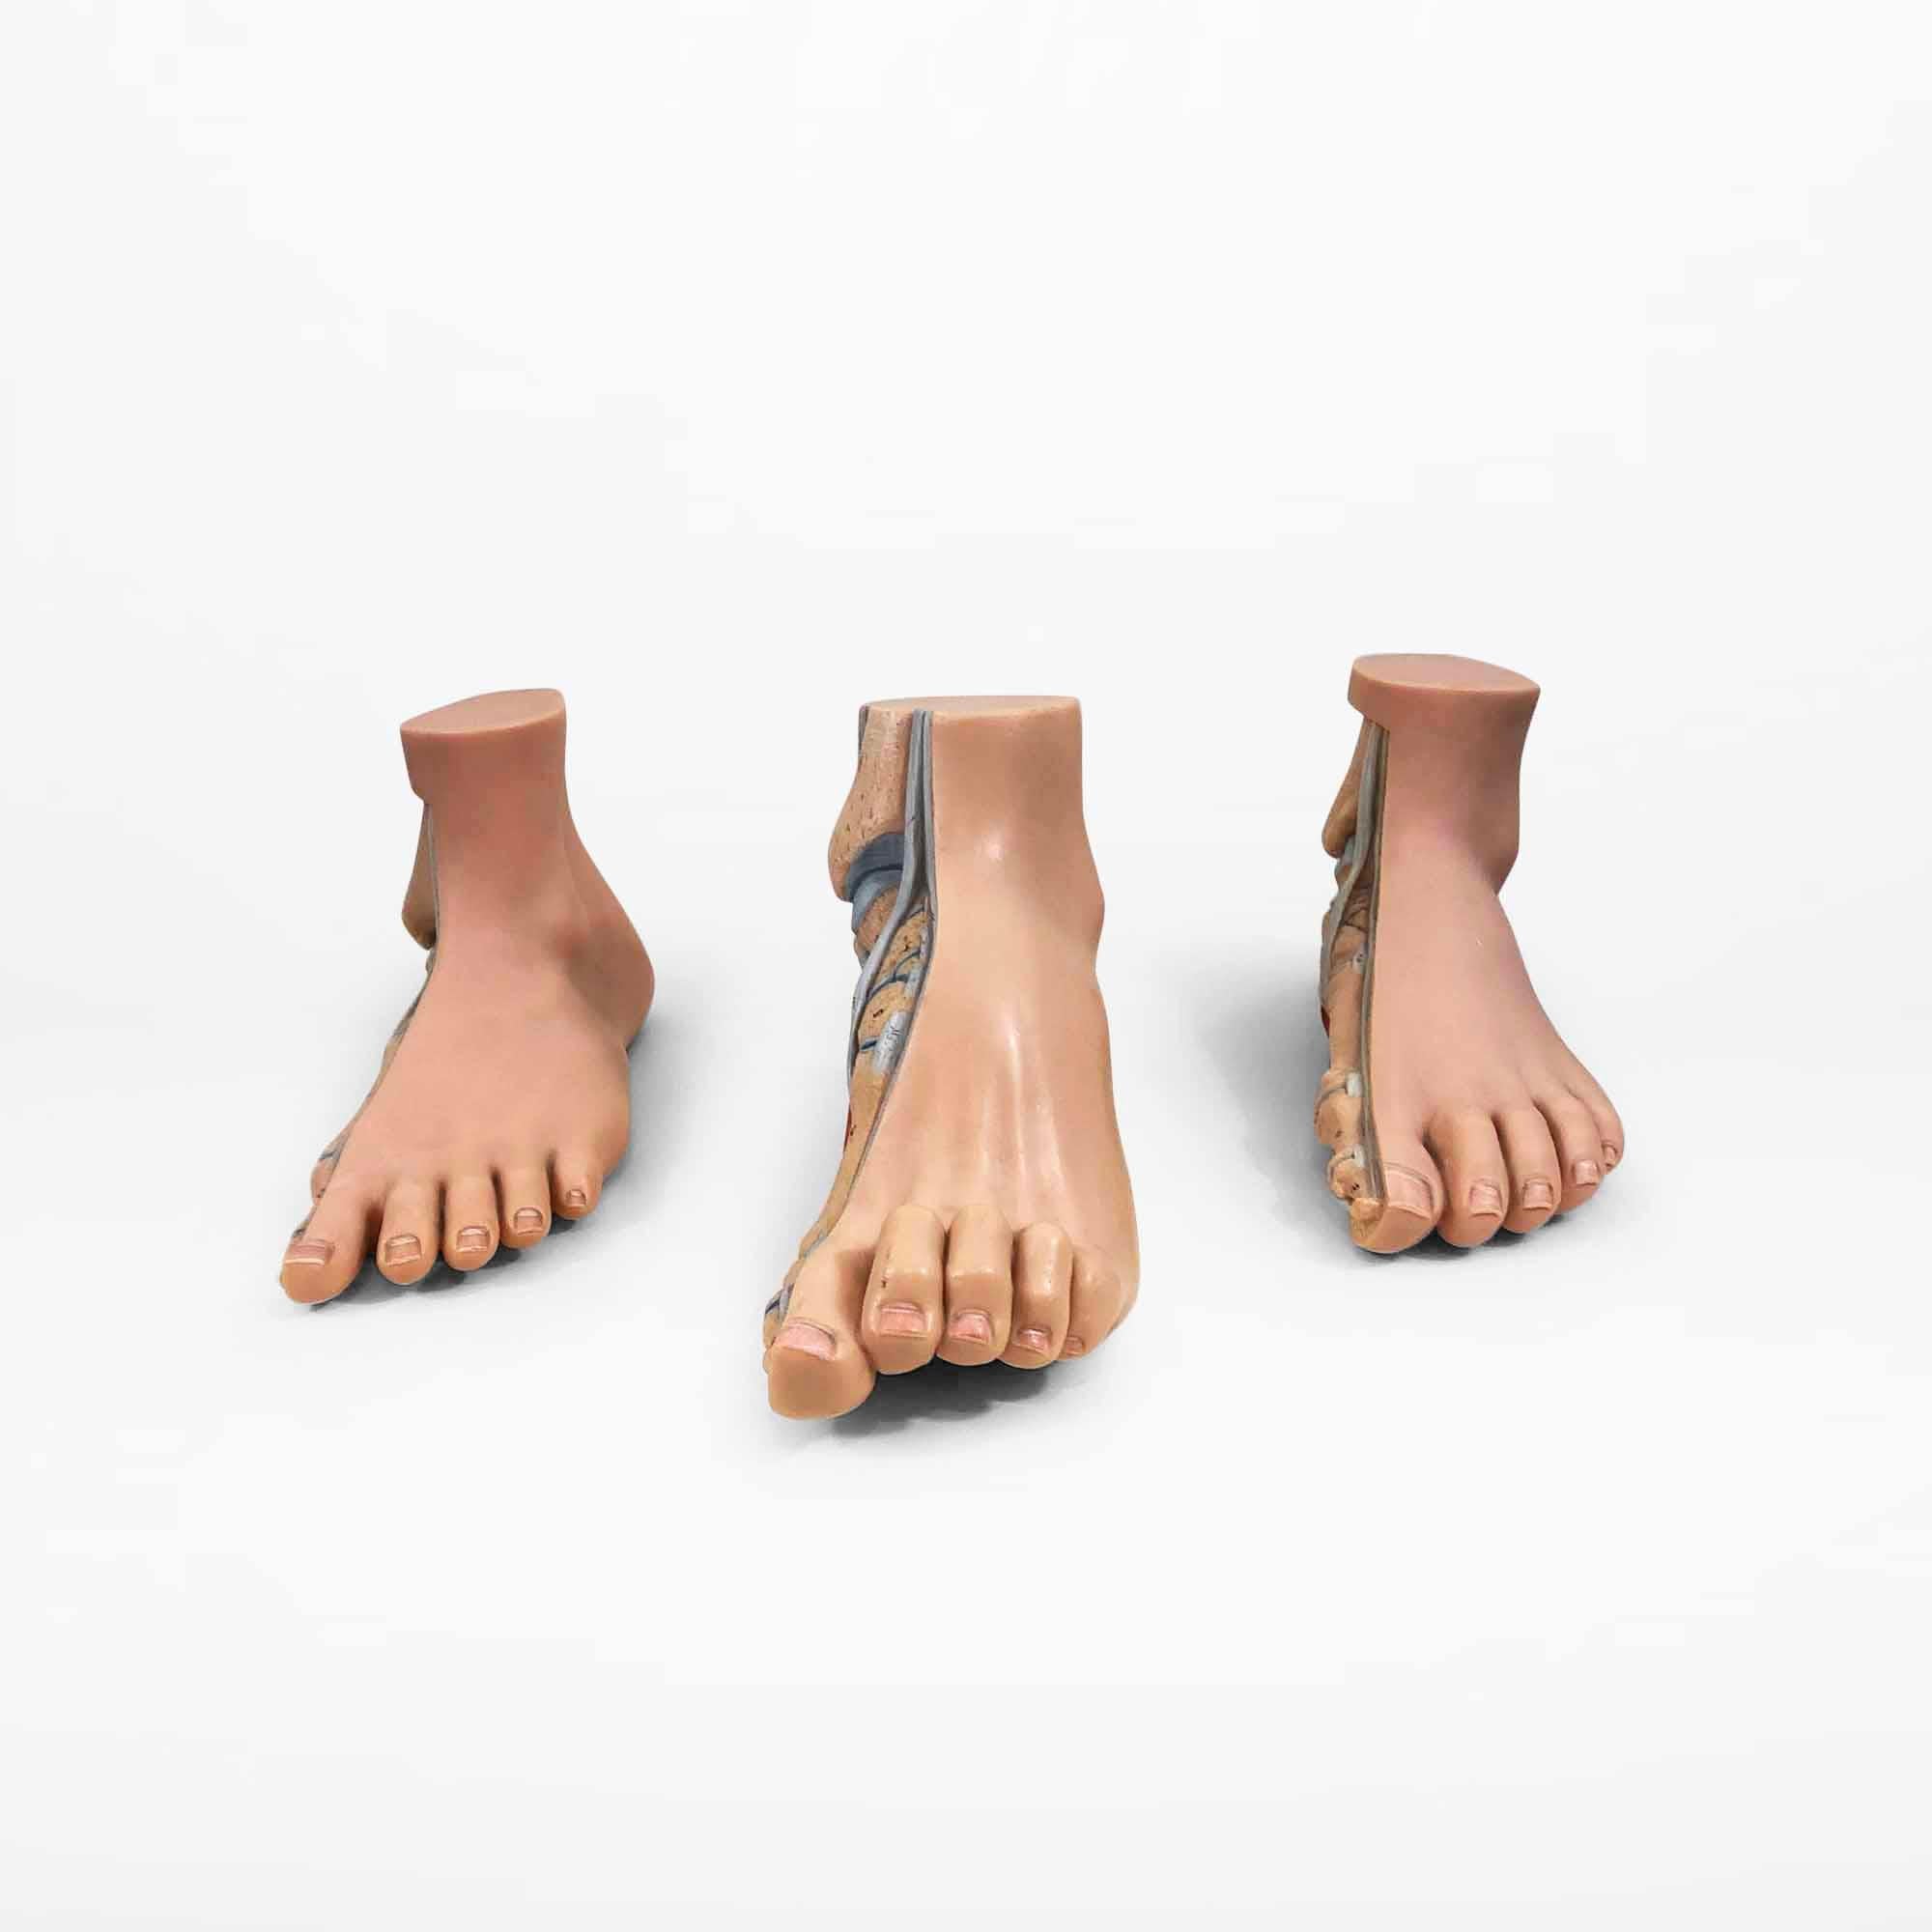 This set contains three anatomical models of human feet. These models show the most common foot conditions: flat foot, normal foot, and a high arch. This classic medical model is very detailed and has beautiful colors. It was designed to teach